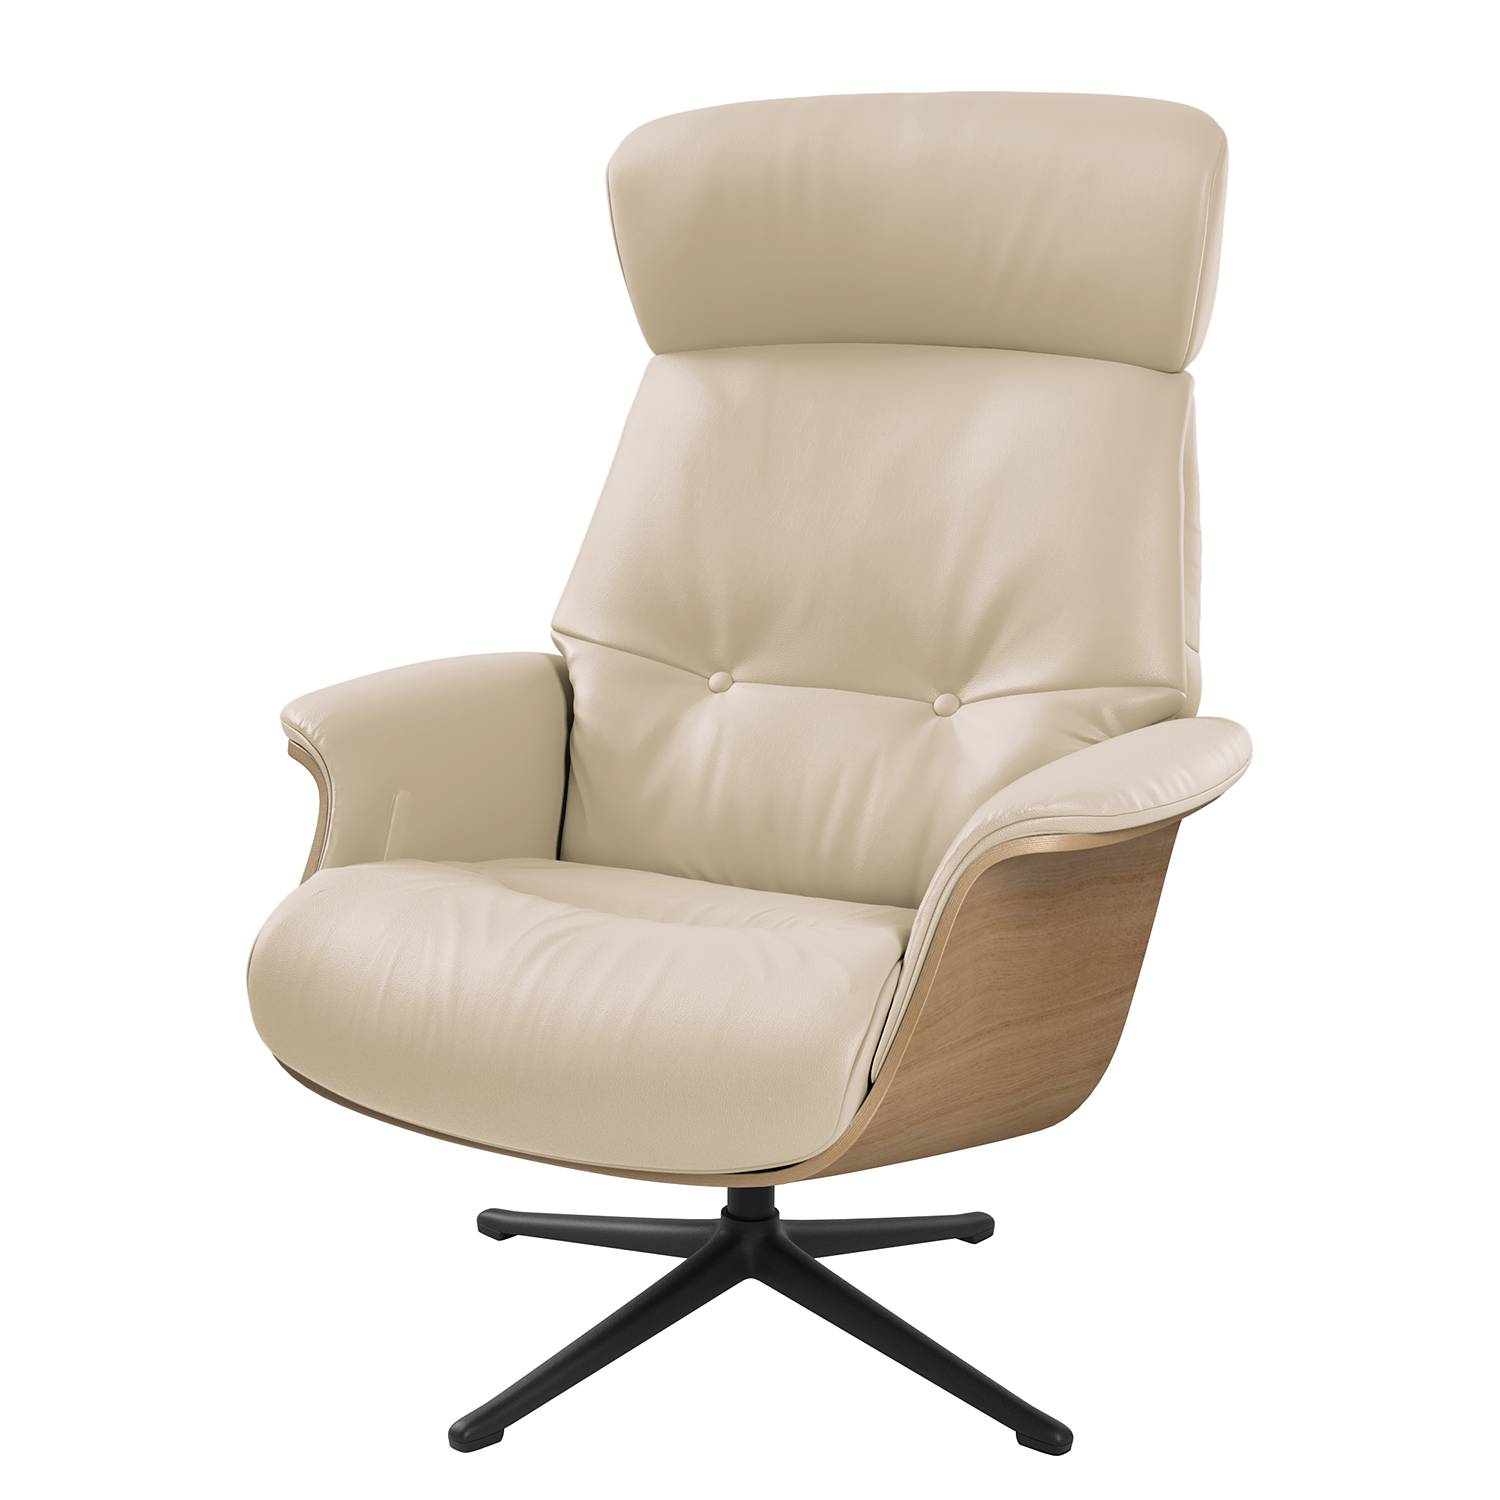 Image of Fauteuil relax Anderson I 000000001000131262